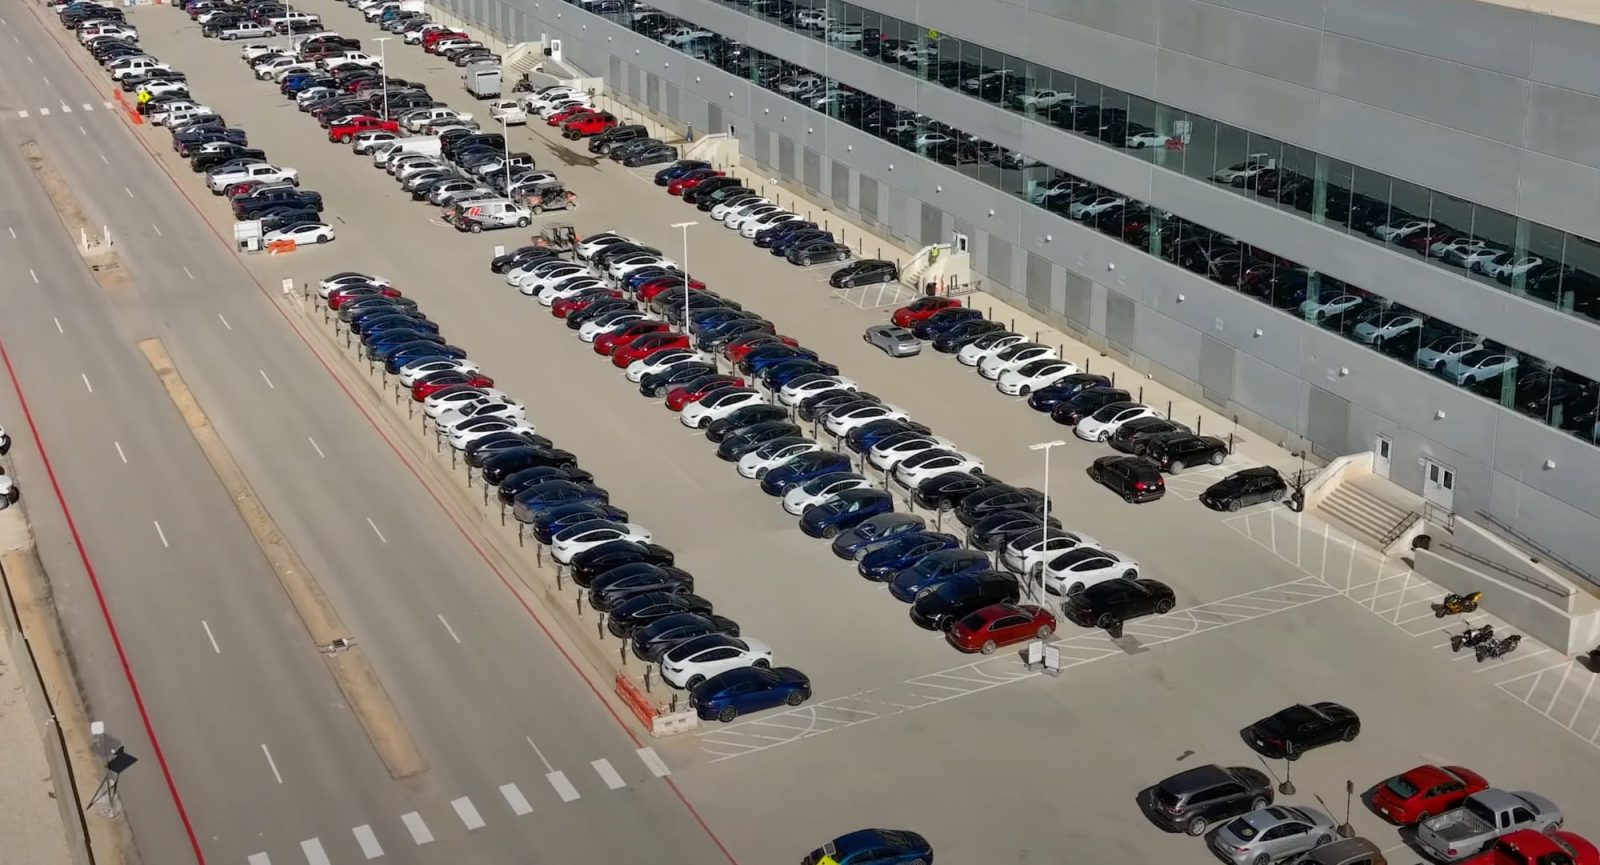 Dozens Of New Tesla Model 3 And Y Vehicles Shown At Gigafactory Texas In Latest Drone Video